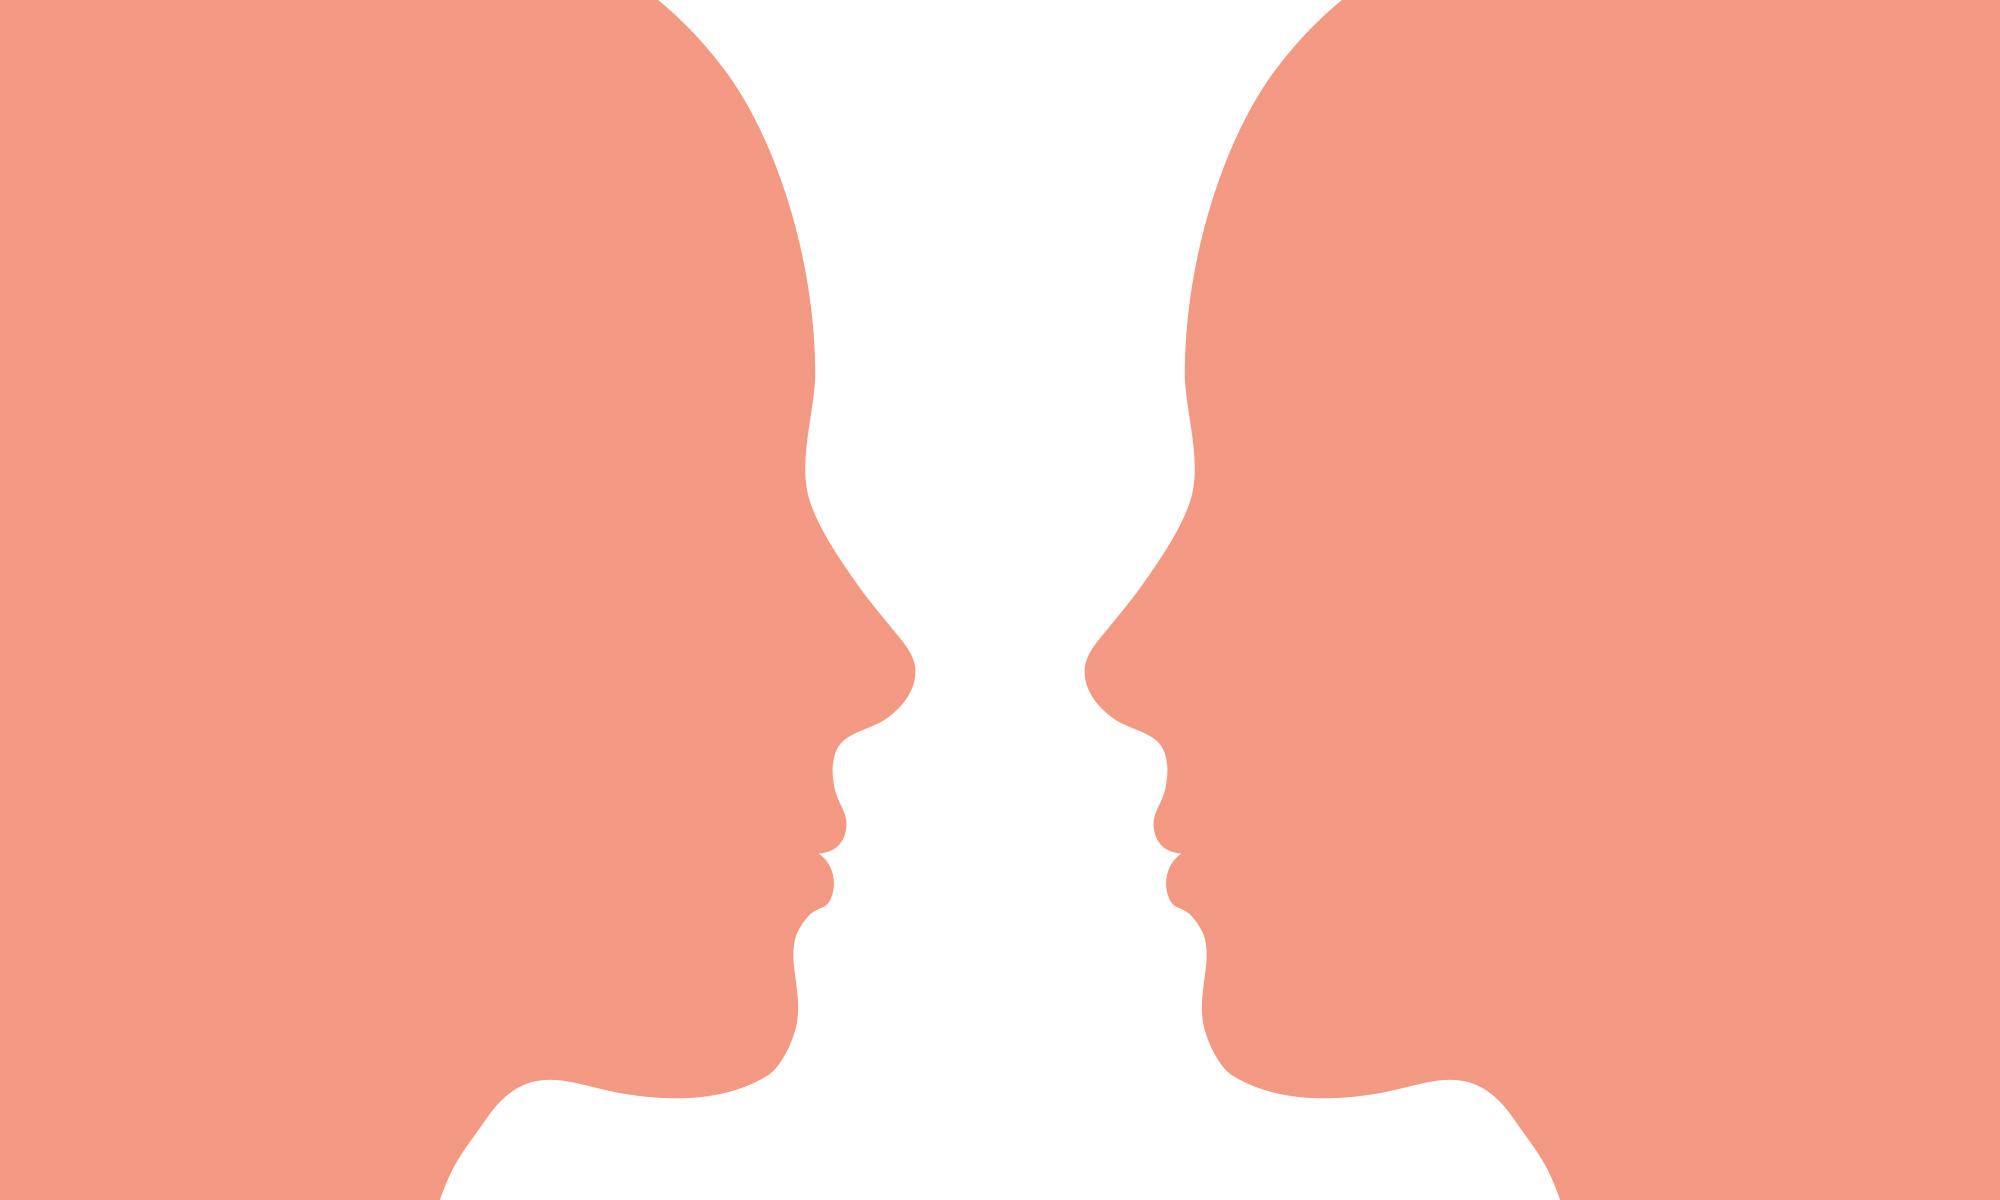 Flat salmon pink silhouettes face each other